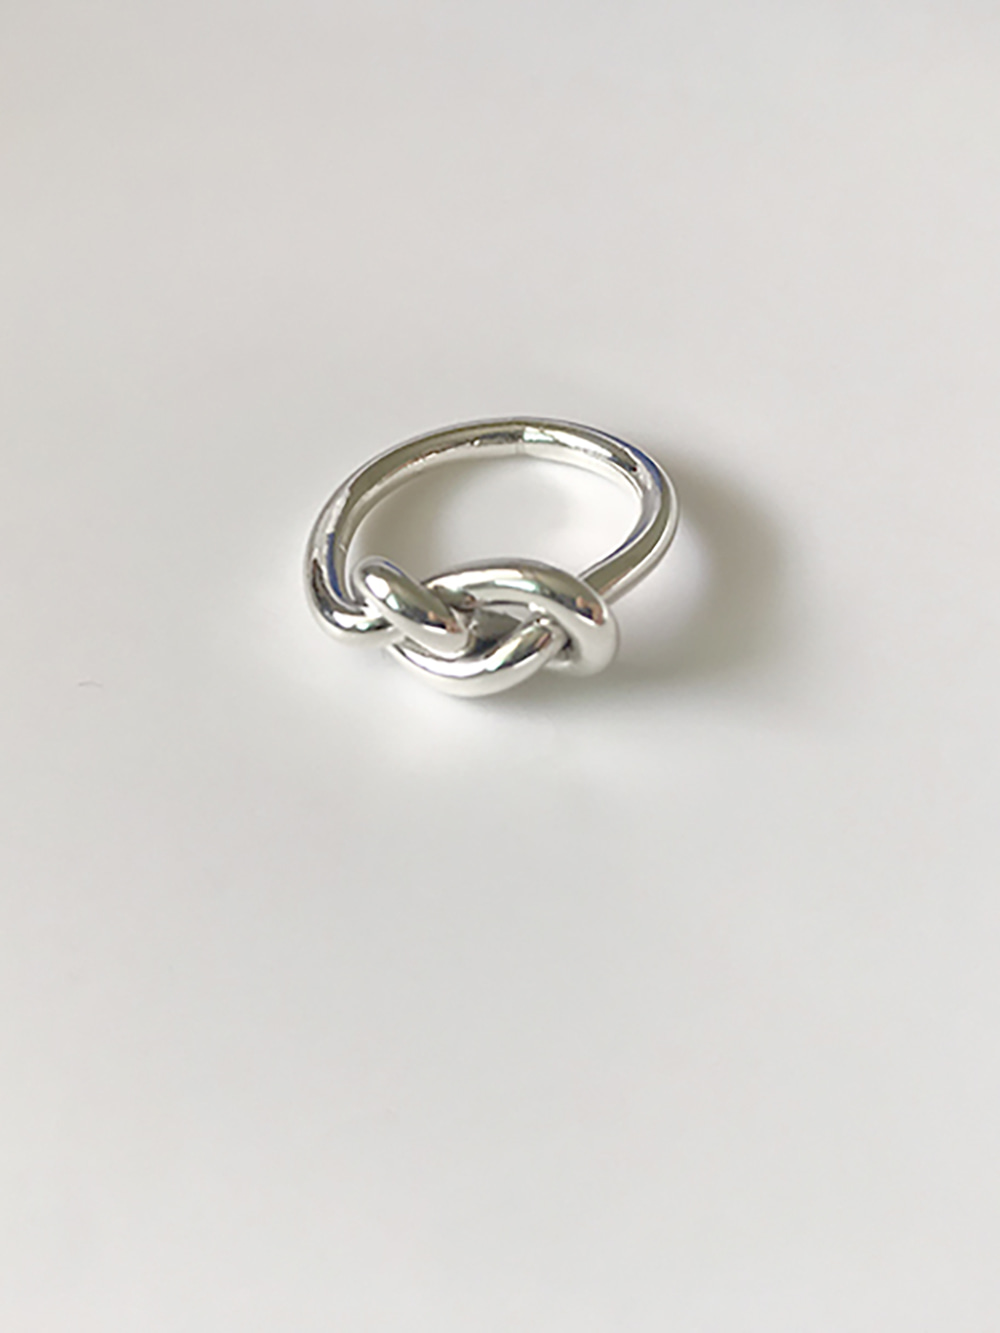 [92.5 silver] frazzle ring